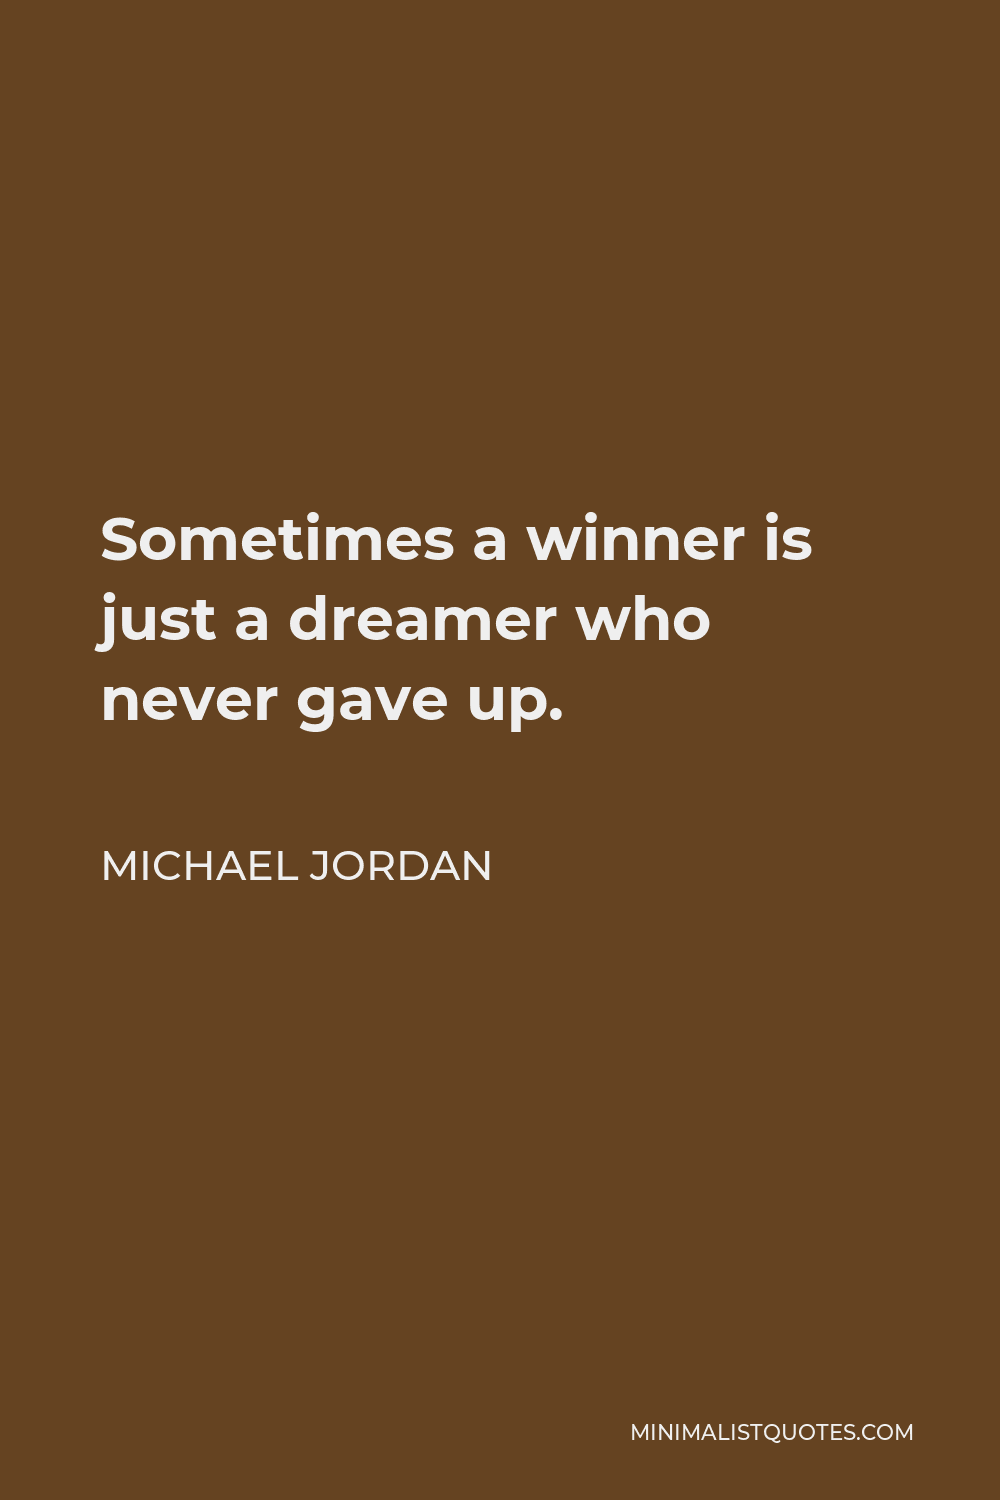 Michael Jordan Quote - Sometimes a winner is just a dreamer who never gave up.